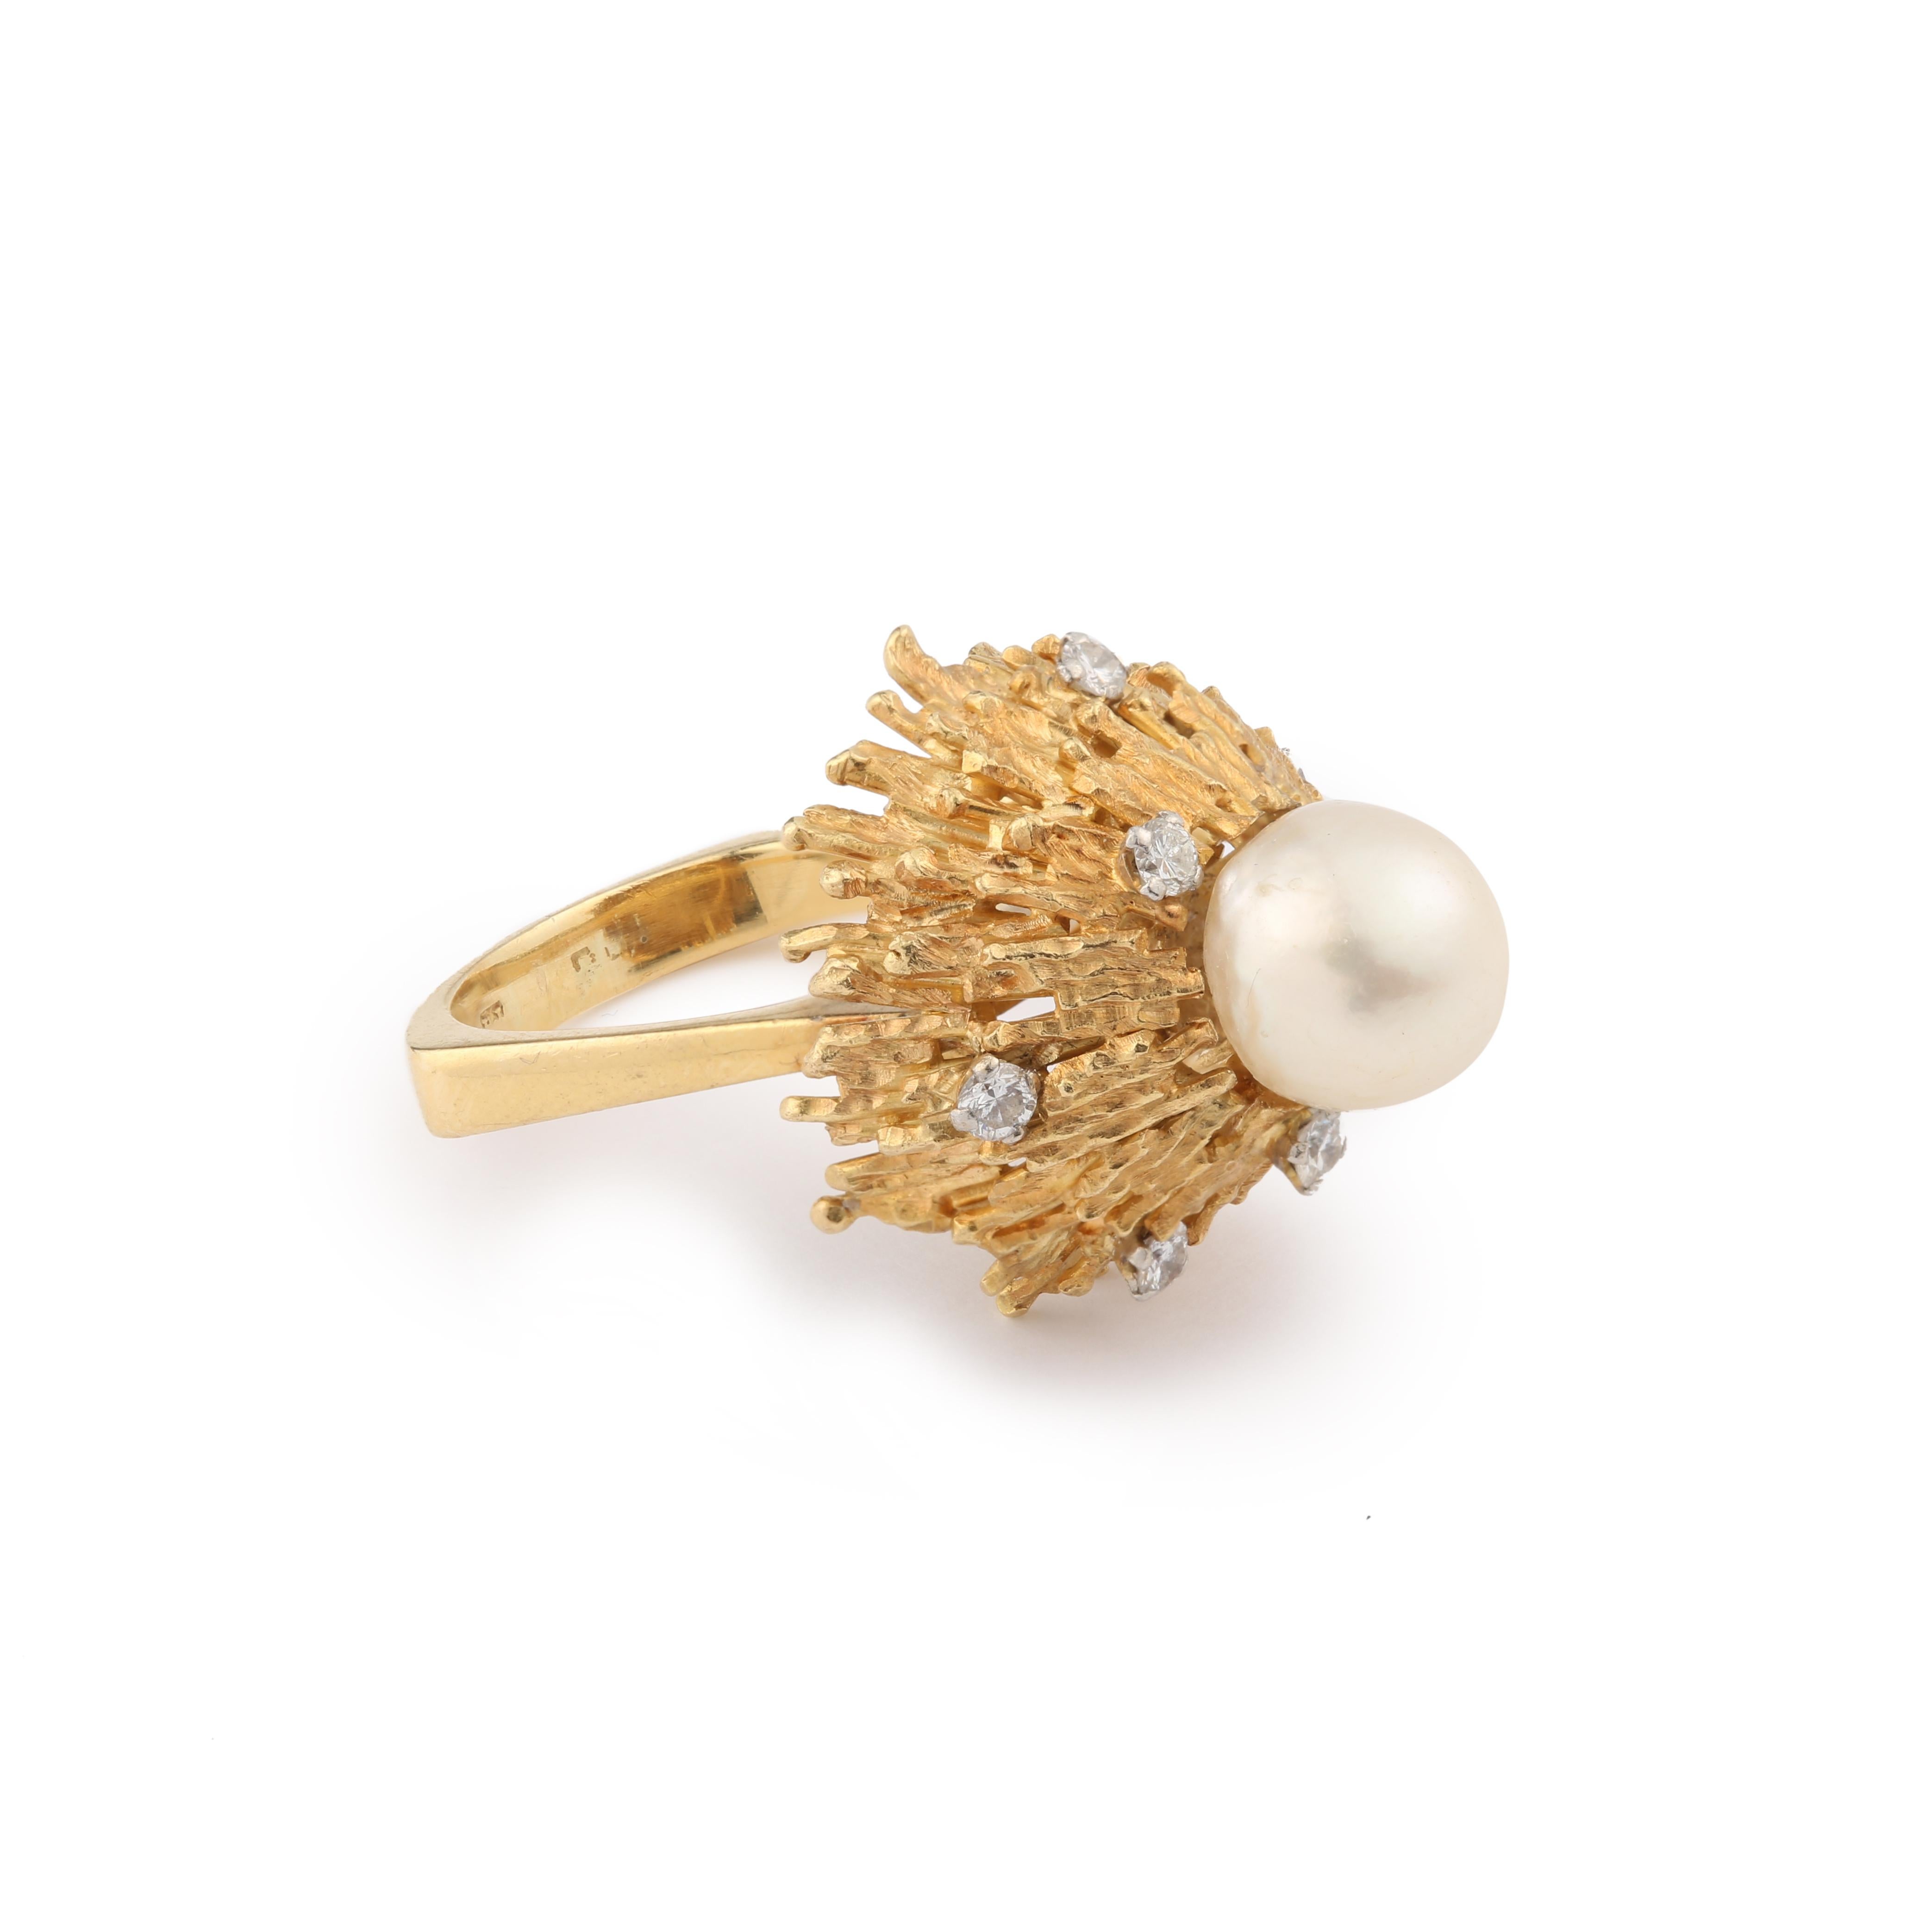 Andrew Grima ring featuring a granite gold dome set with diamonds and its top with a pearl.

Signature H.J. Co. (One of the first stamp that Andrew Grima used before he created his own) slightly faded due to sizing.

The Haller Jewellery Company